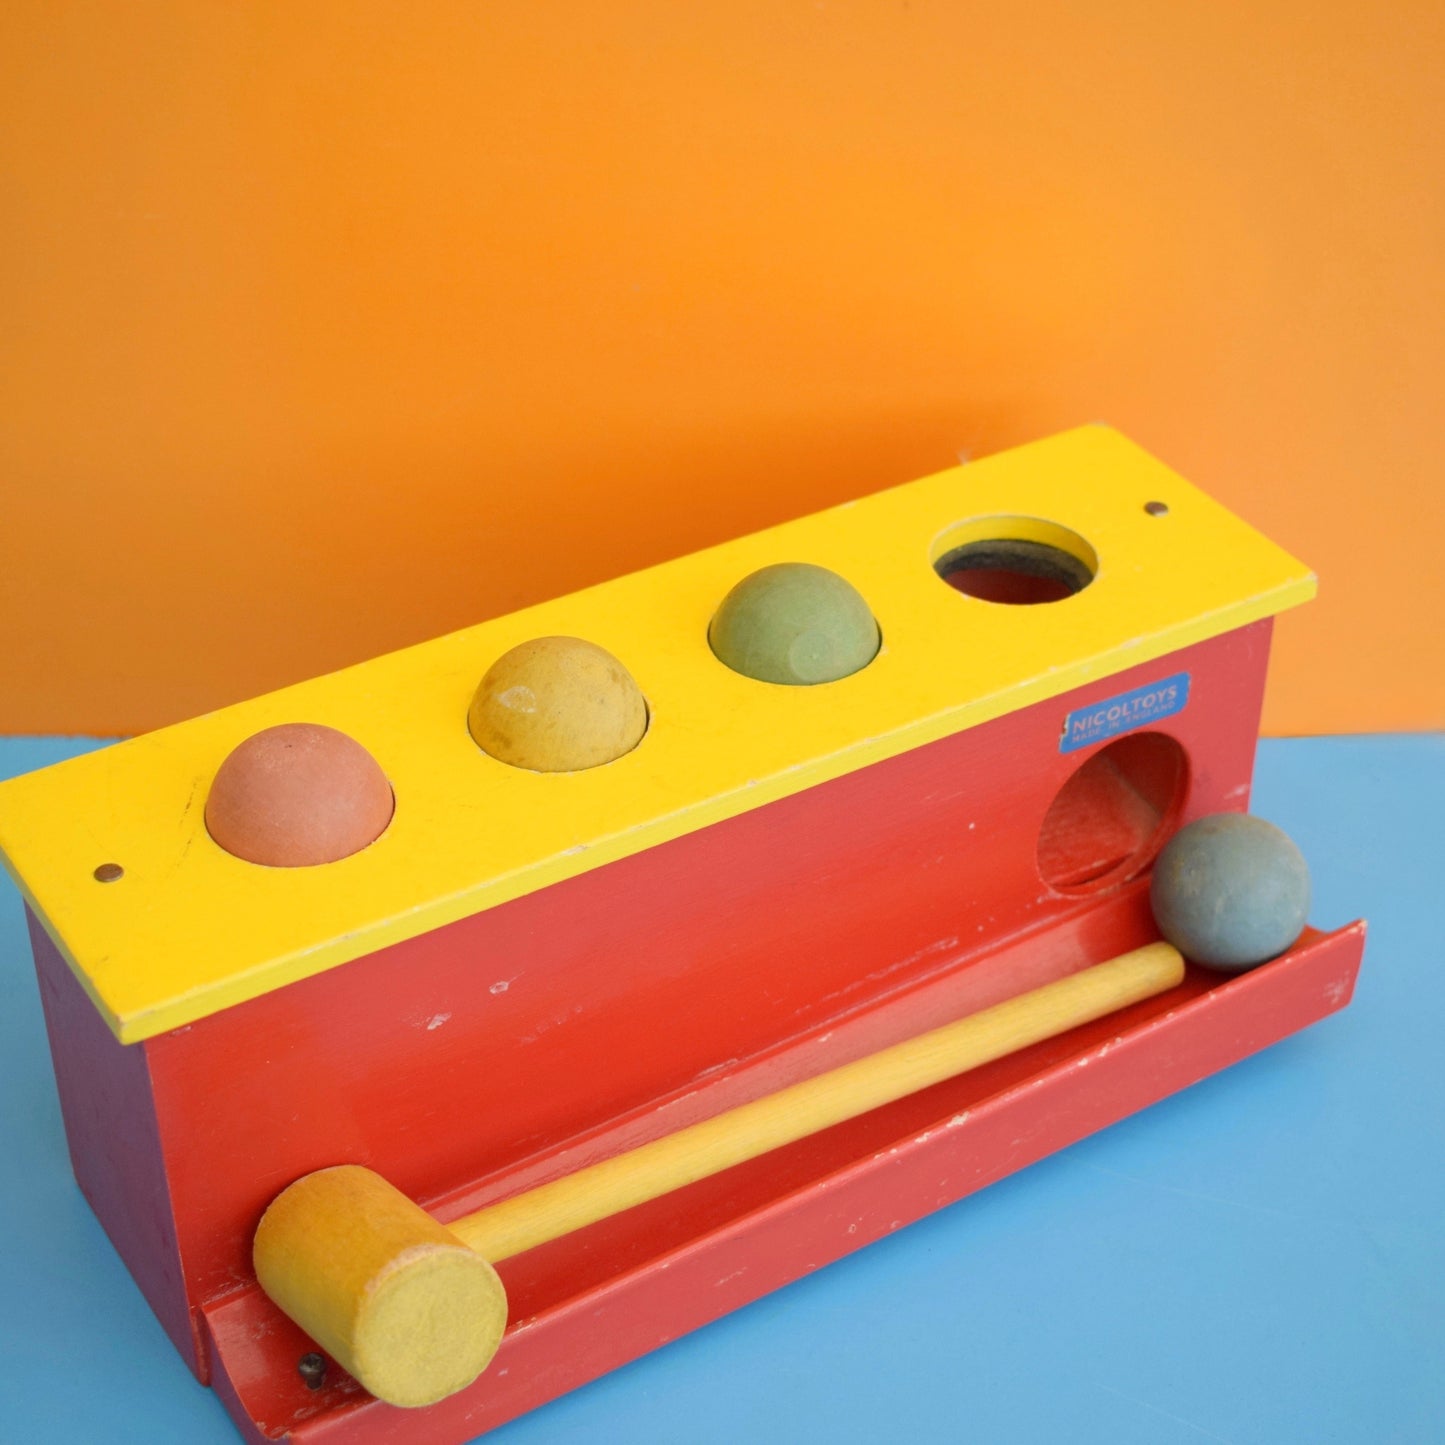 Vintage 1960s Wooden Toy - Hammer Ball Set - NicolToys - Boxed